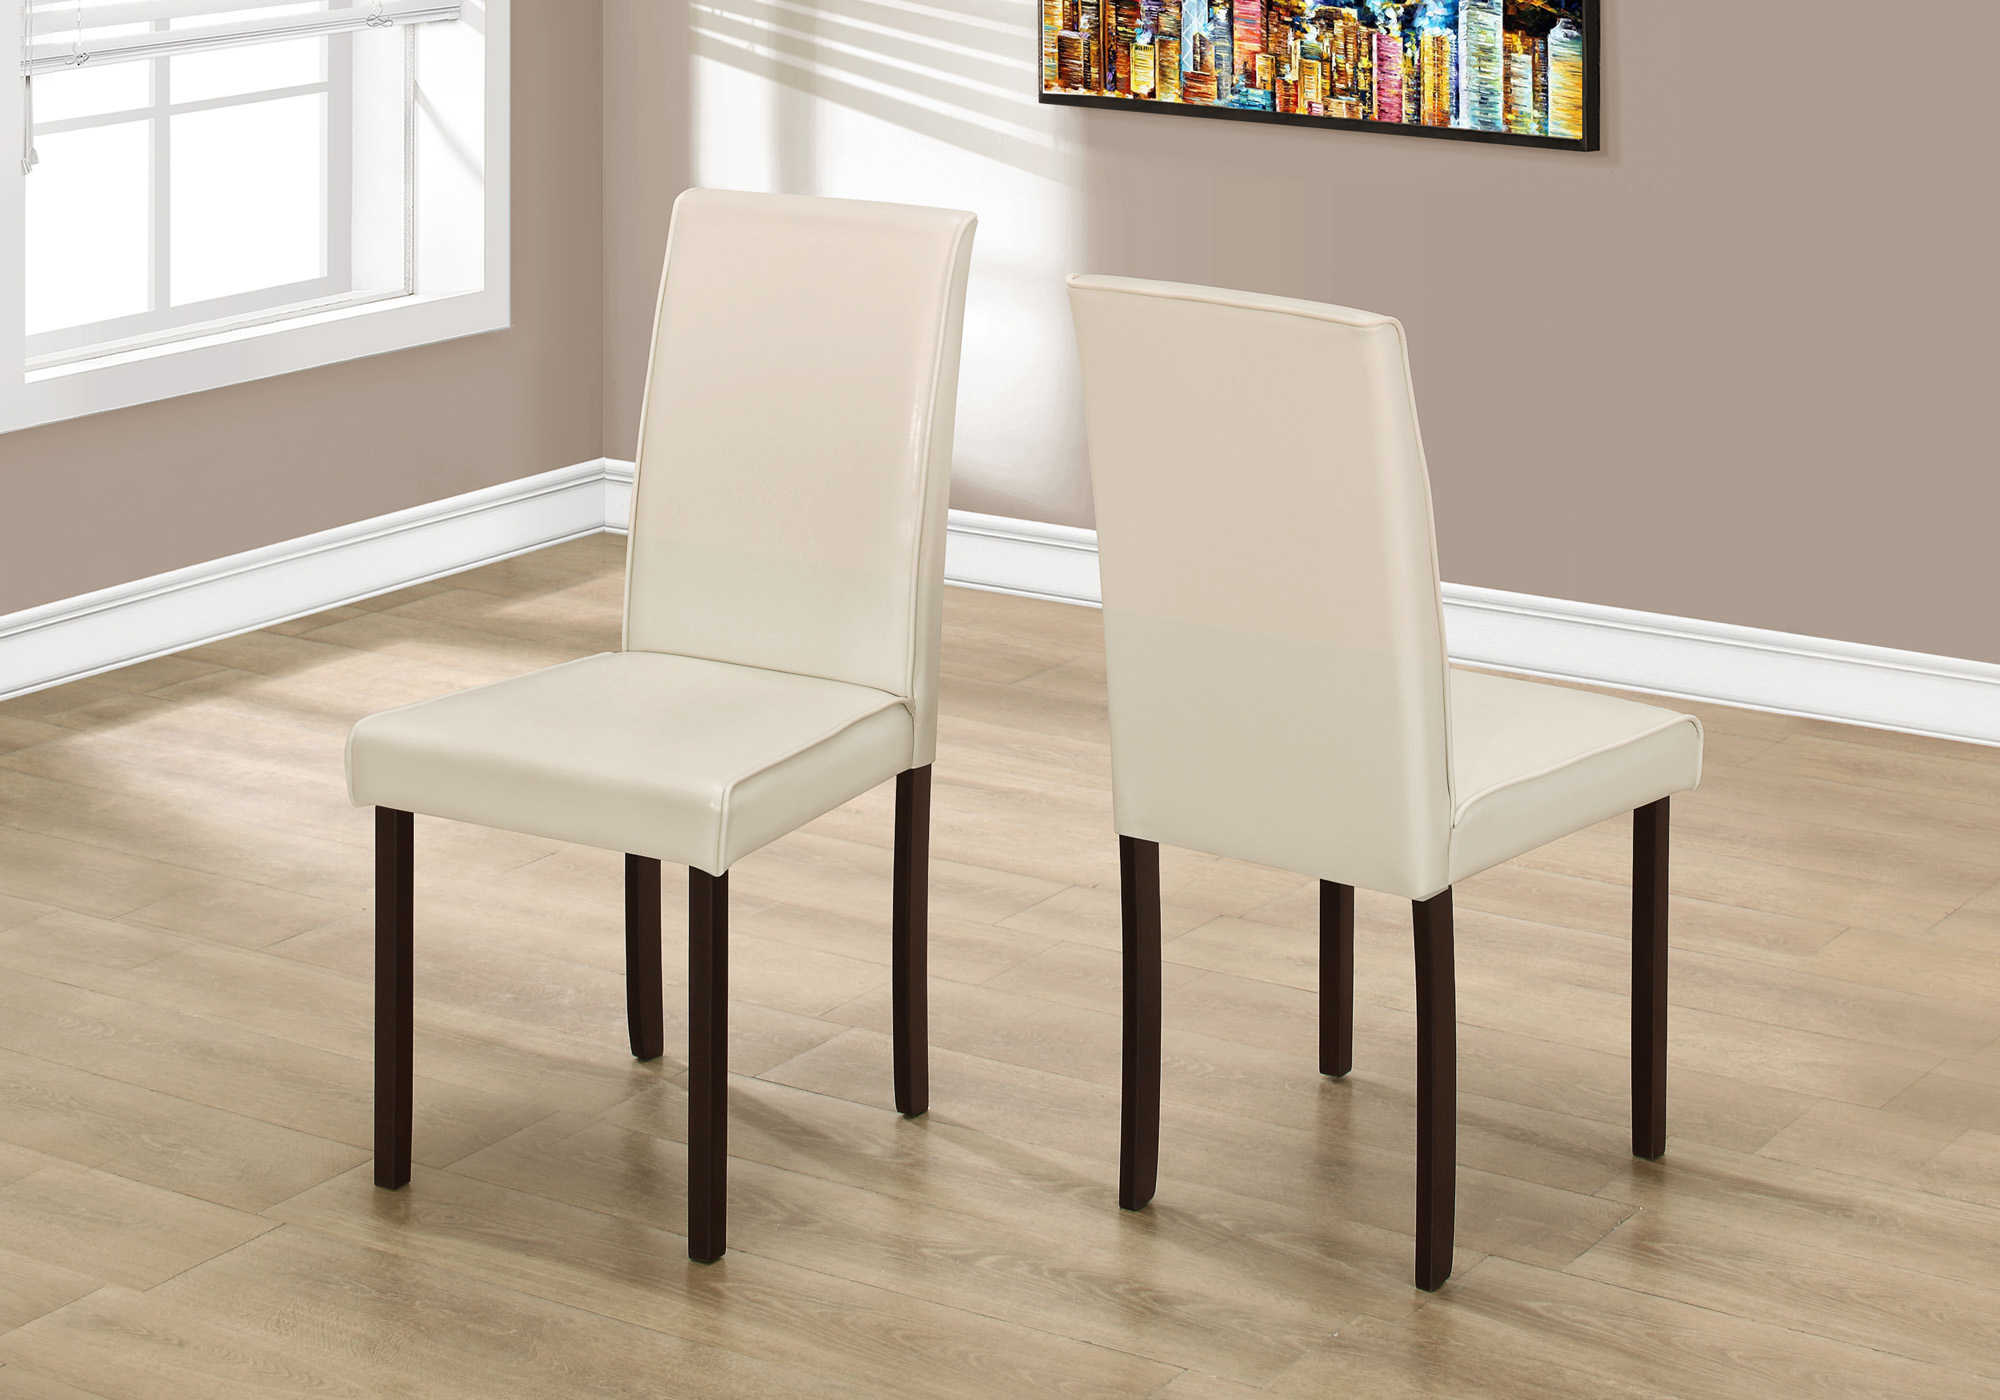 DINING CHAIR - 2PCS / 36"H IVORY LEATHER-LOOK